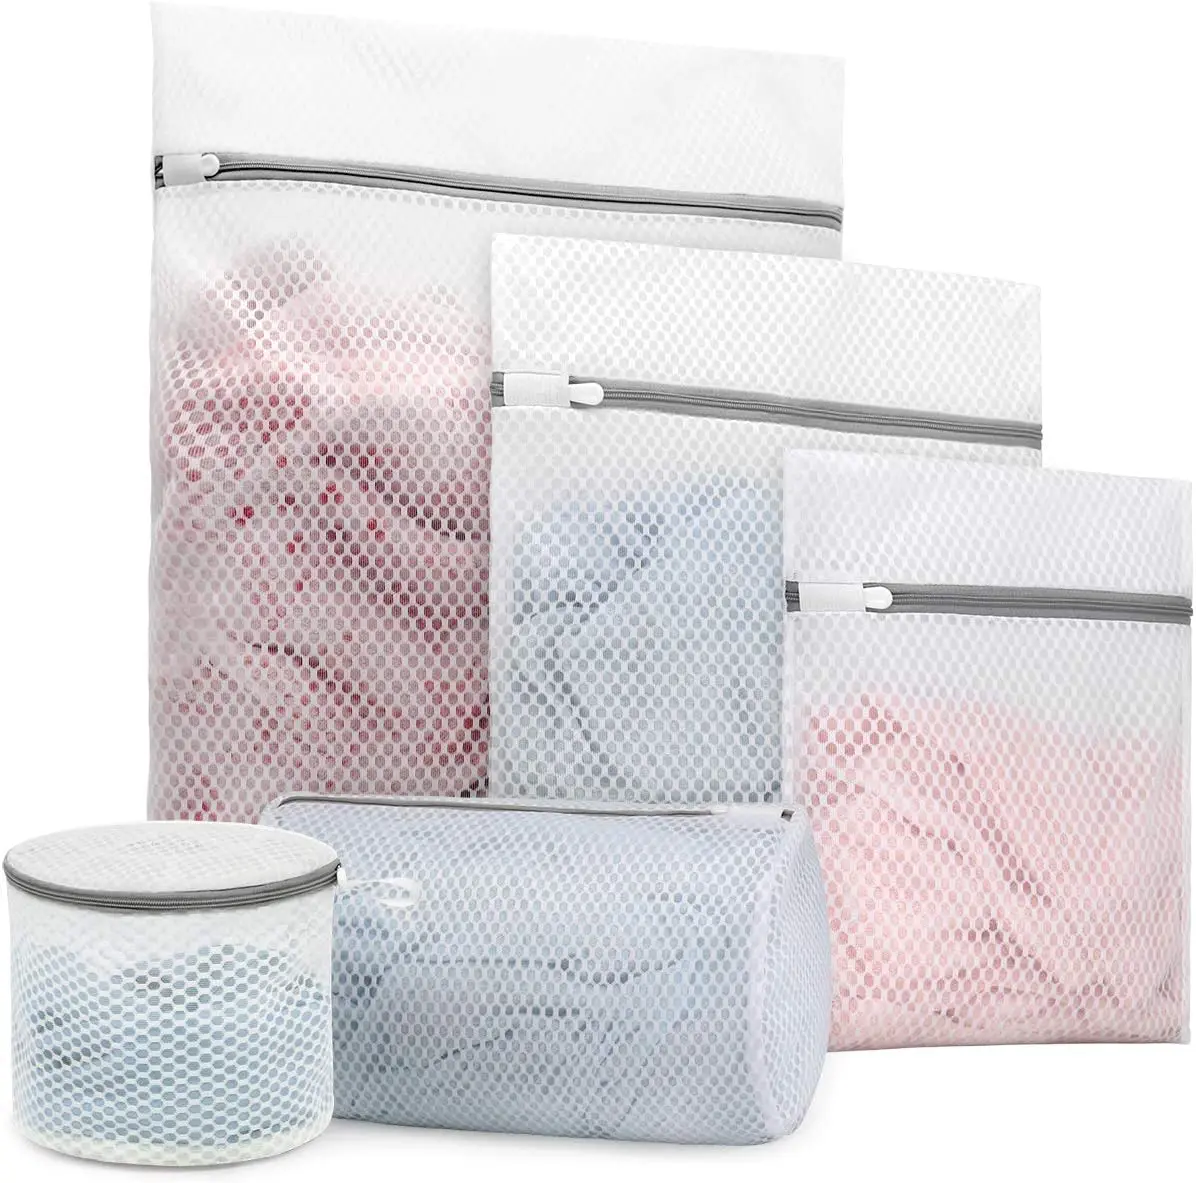 Durable Honeycomb Mesh Laundry Bags Lingerie Bags For Laundry Honeycomb ...